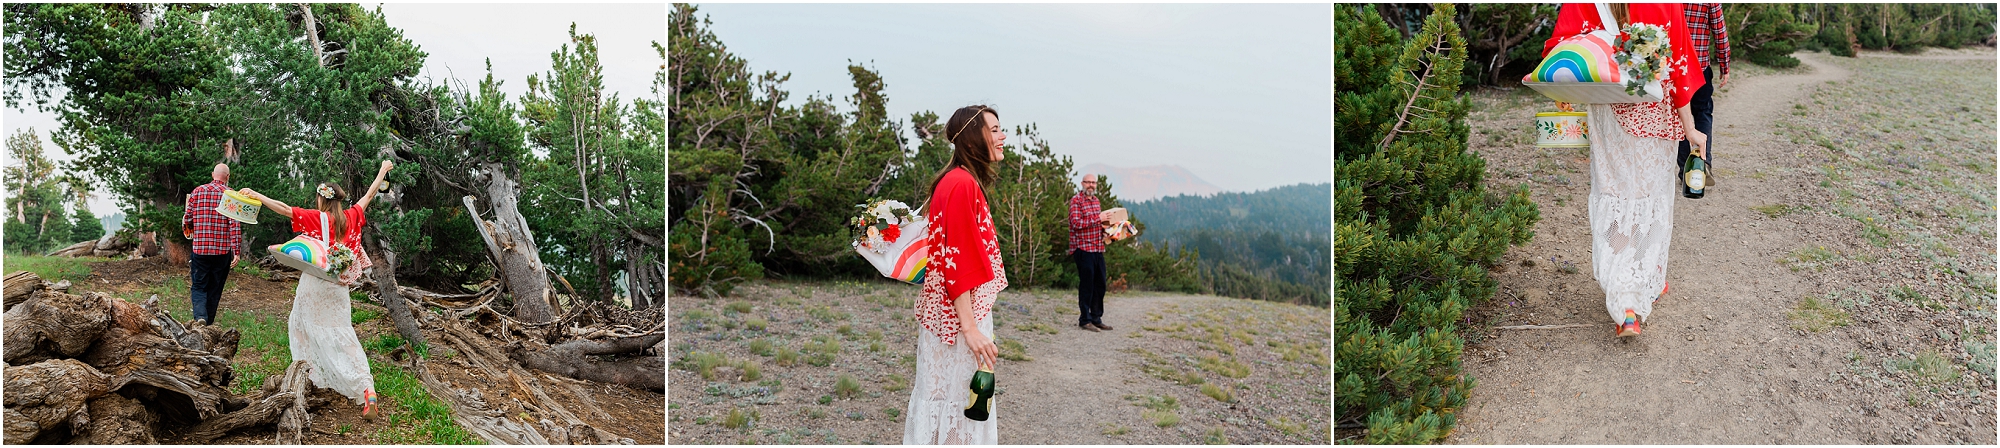 The bride takes one last look at Crater Lake before she heads down the trail back to their car after eloping in the national park in Oregon. | Erica Swantek Photography